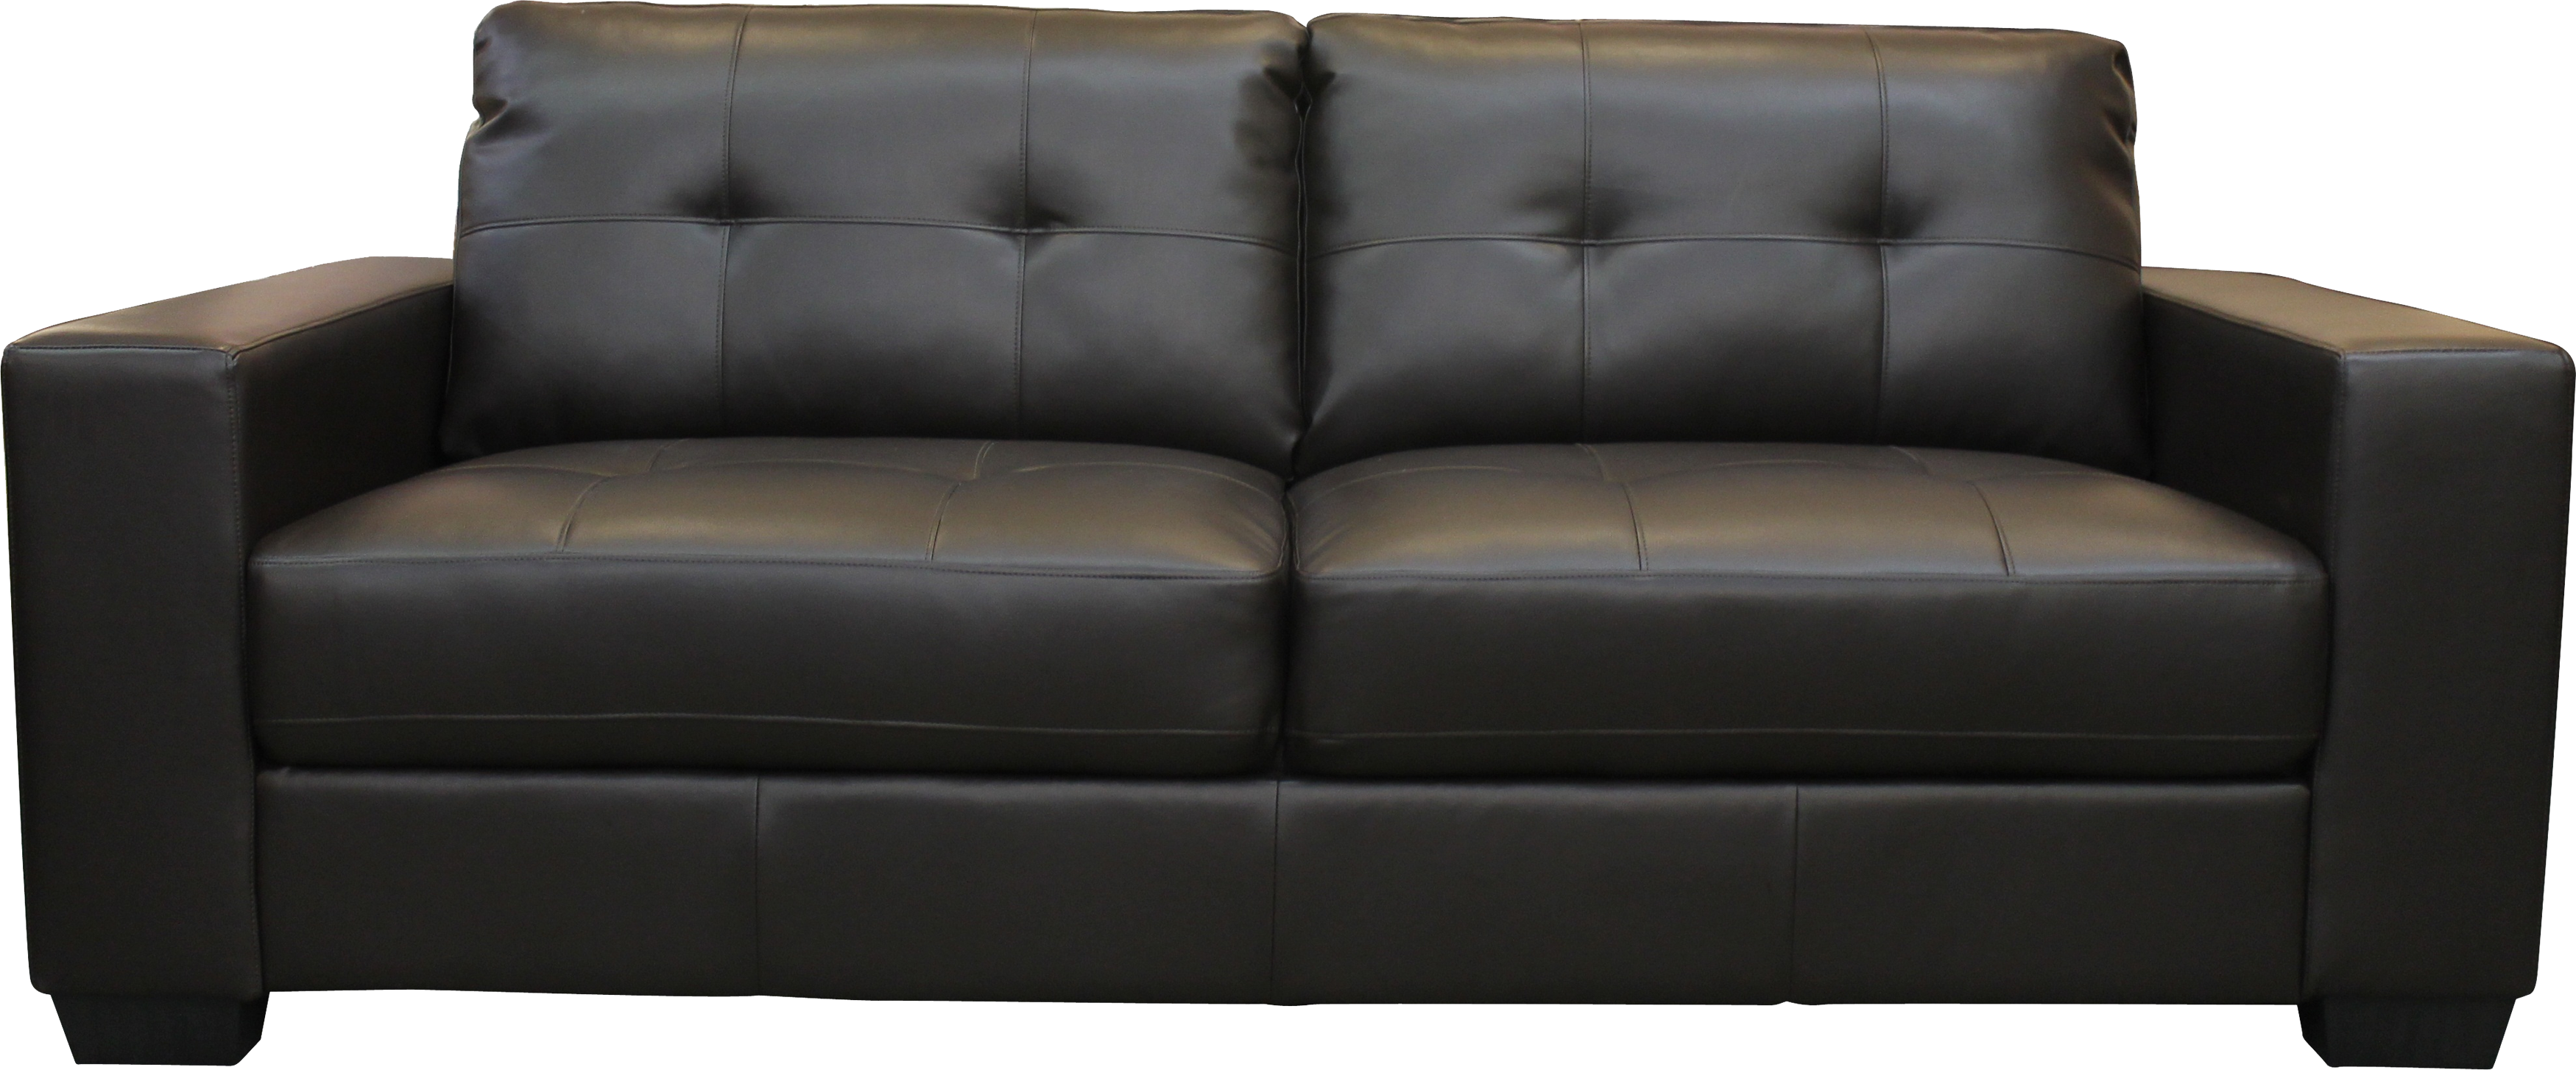 Couch clipart single sofa. Hd png transparent images